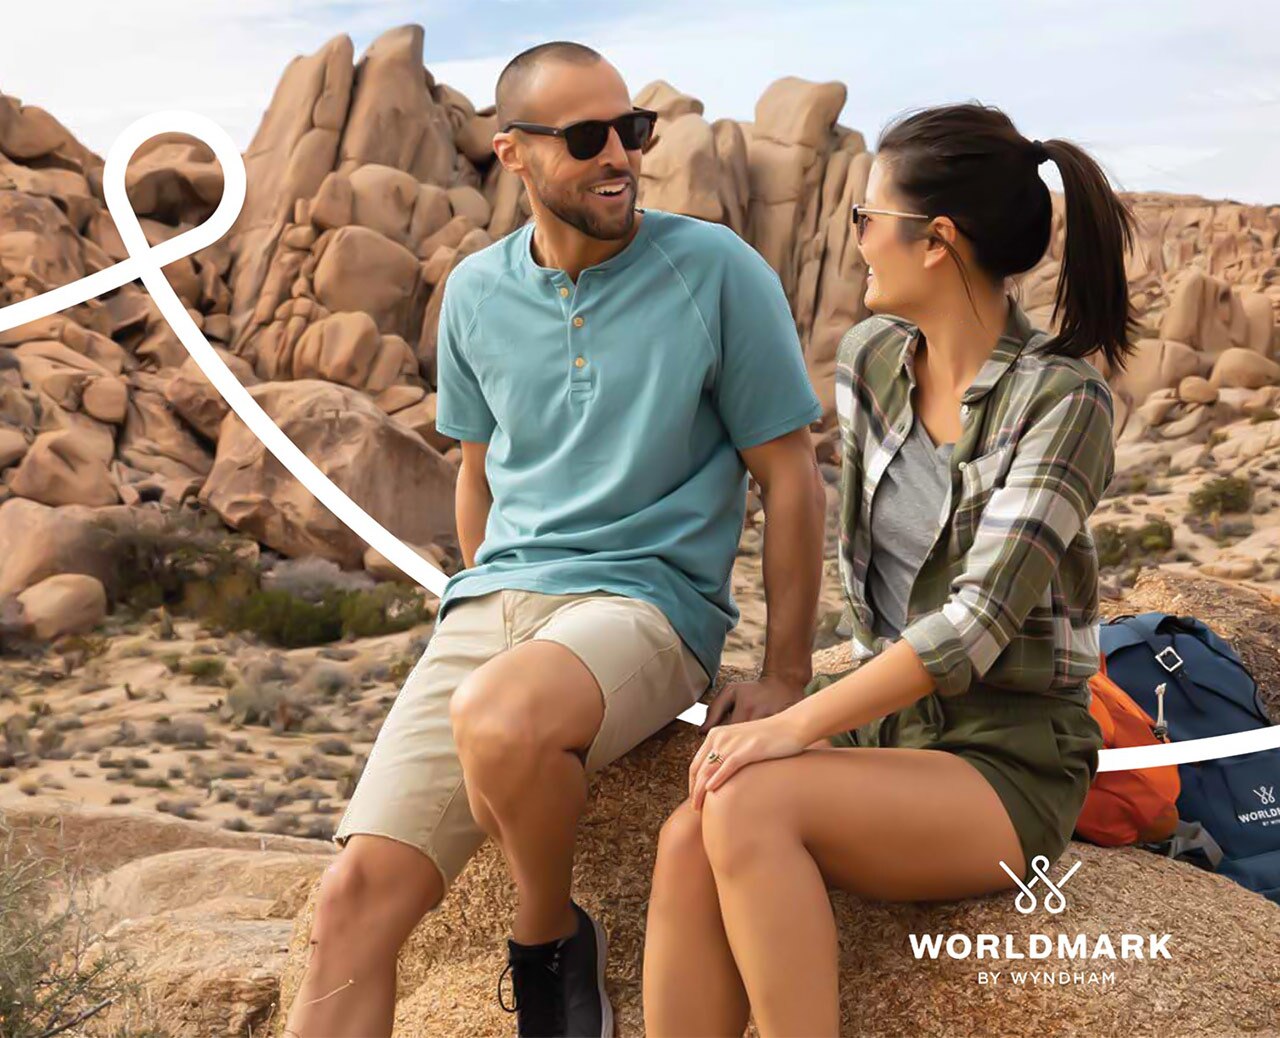 A man and woman wearing sunglasses smile at each other sitting on a boulder along a rocky hiking path.